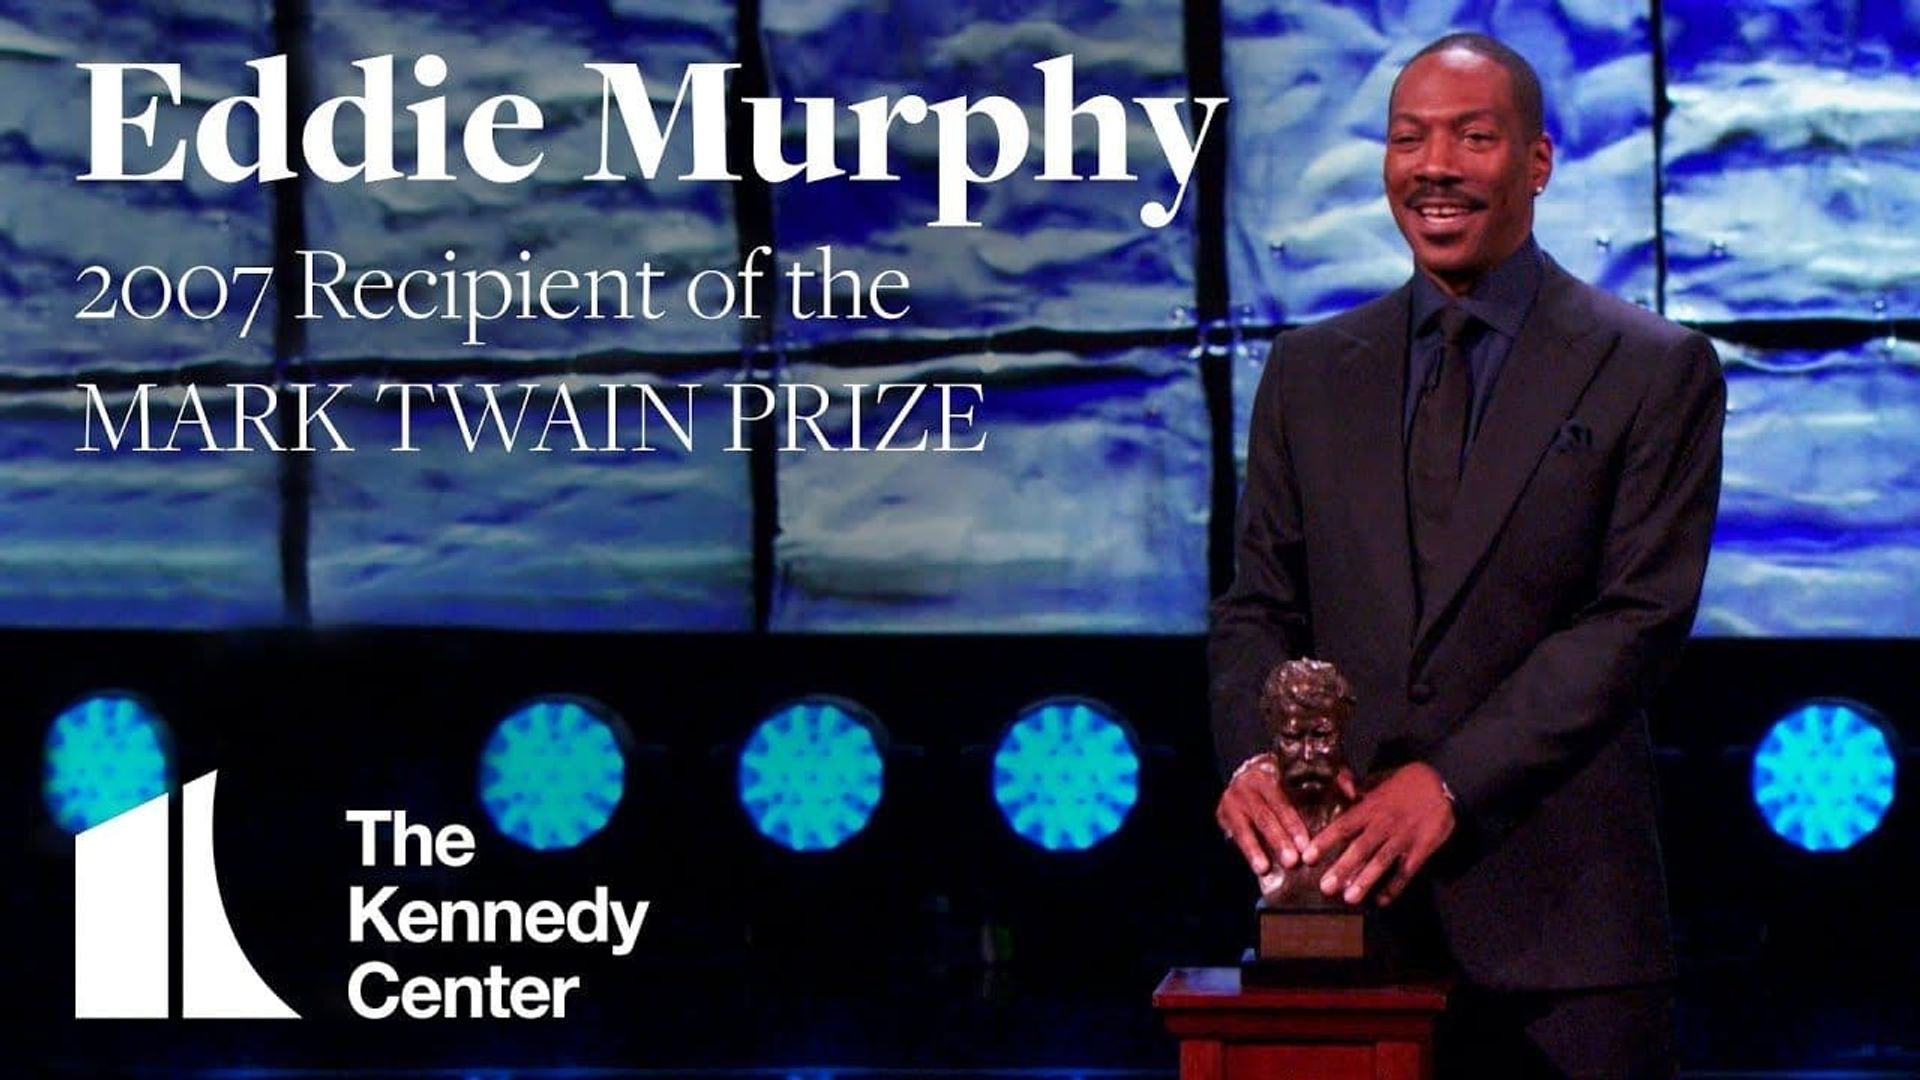 The 18th Annual Mark Twain Prize for American Humor: Celebrating Eddie Murphy background